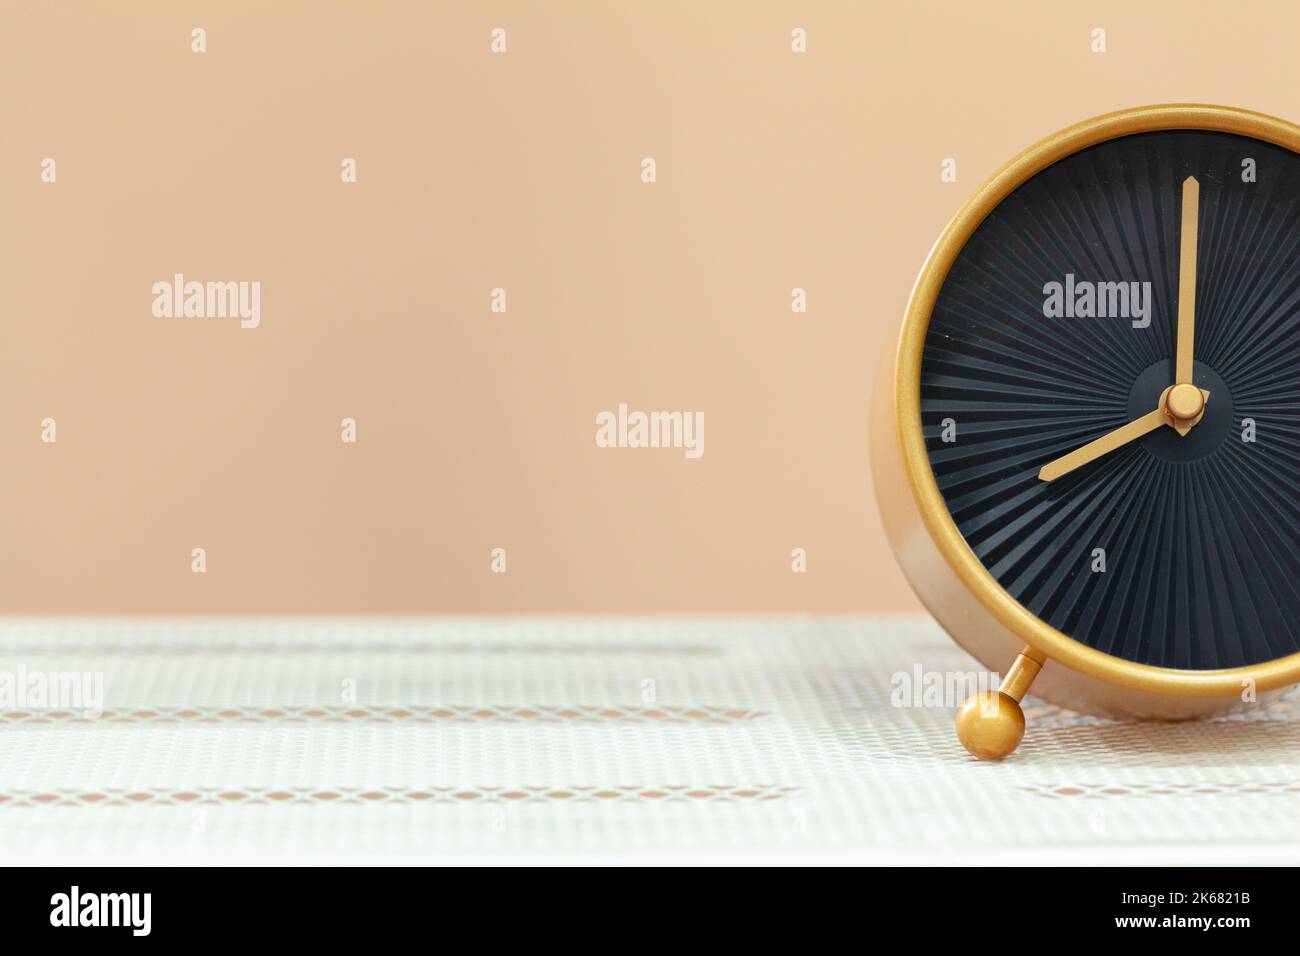 Alarm clock on wooden table close up Stock Photo